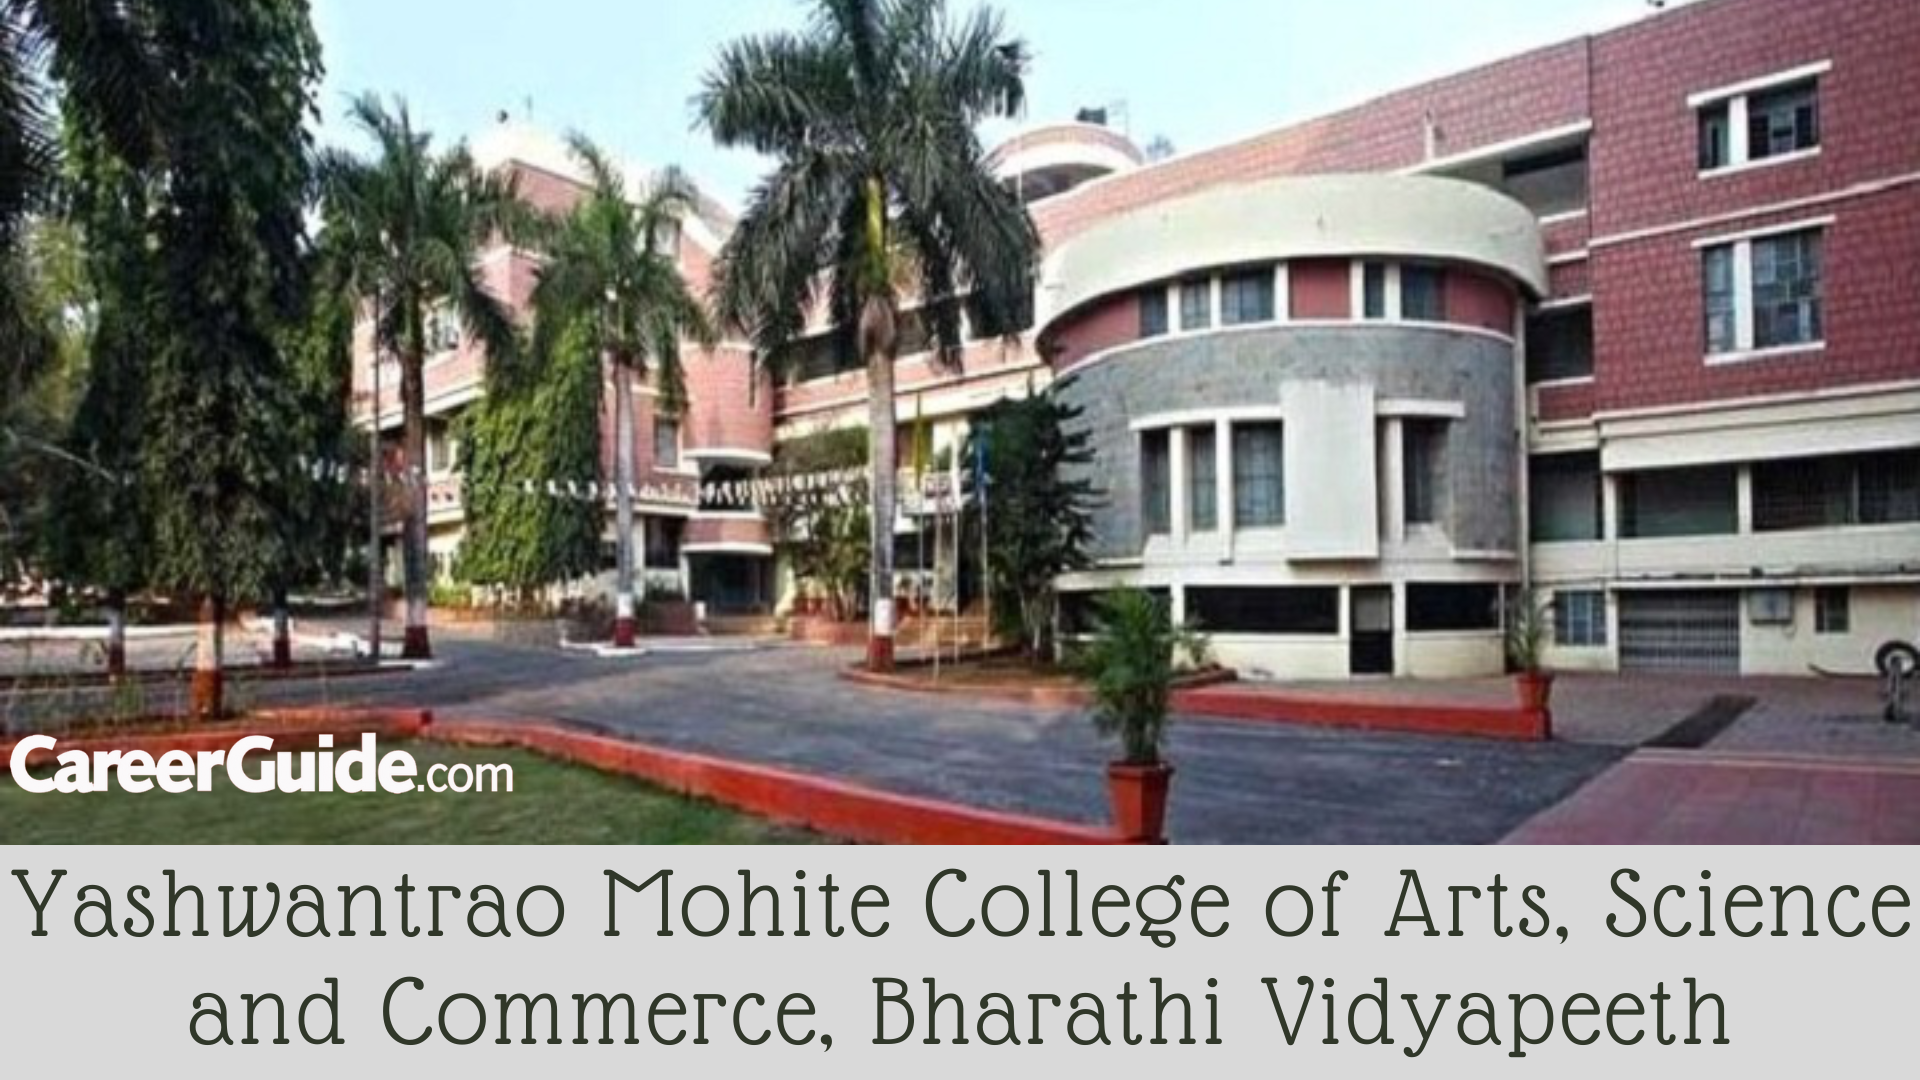 Yashwantrao Mohite College Of Arts, Science And Commerce, Bharathi Vidyapeeth